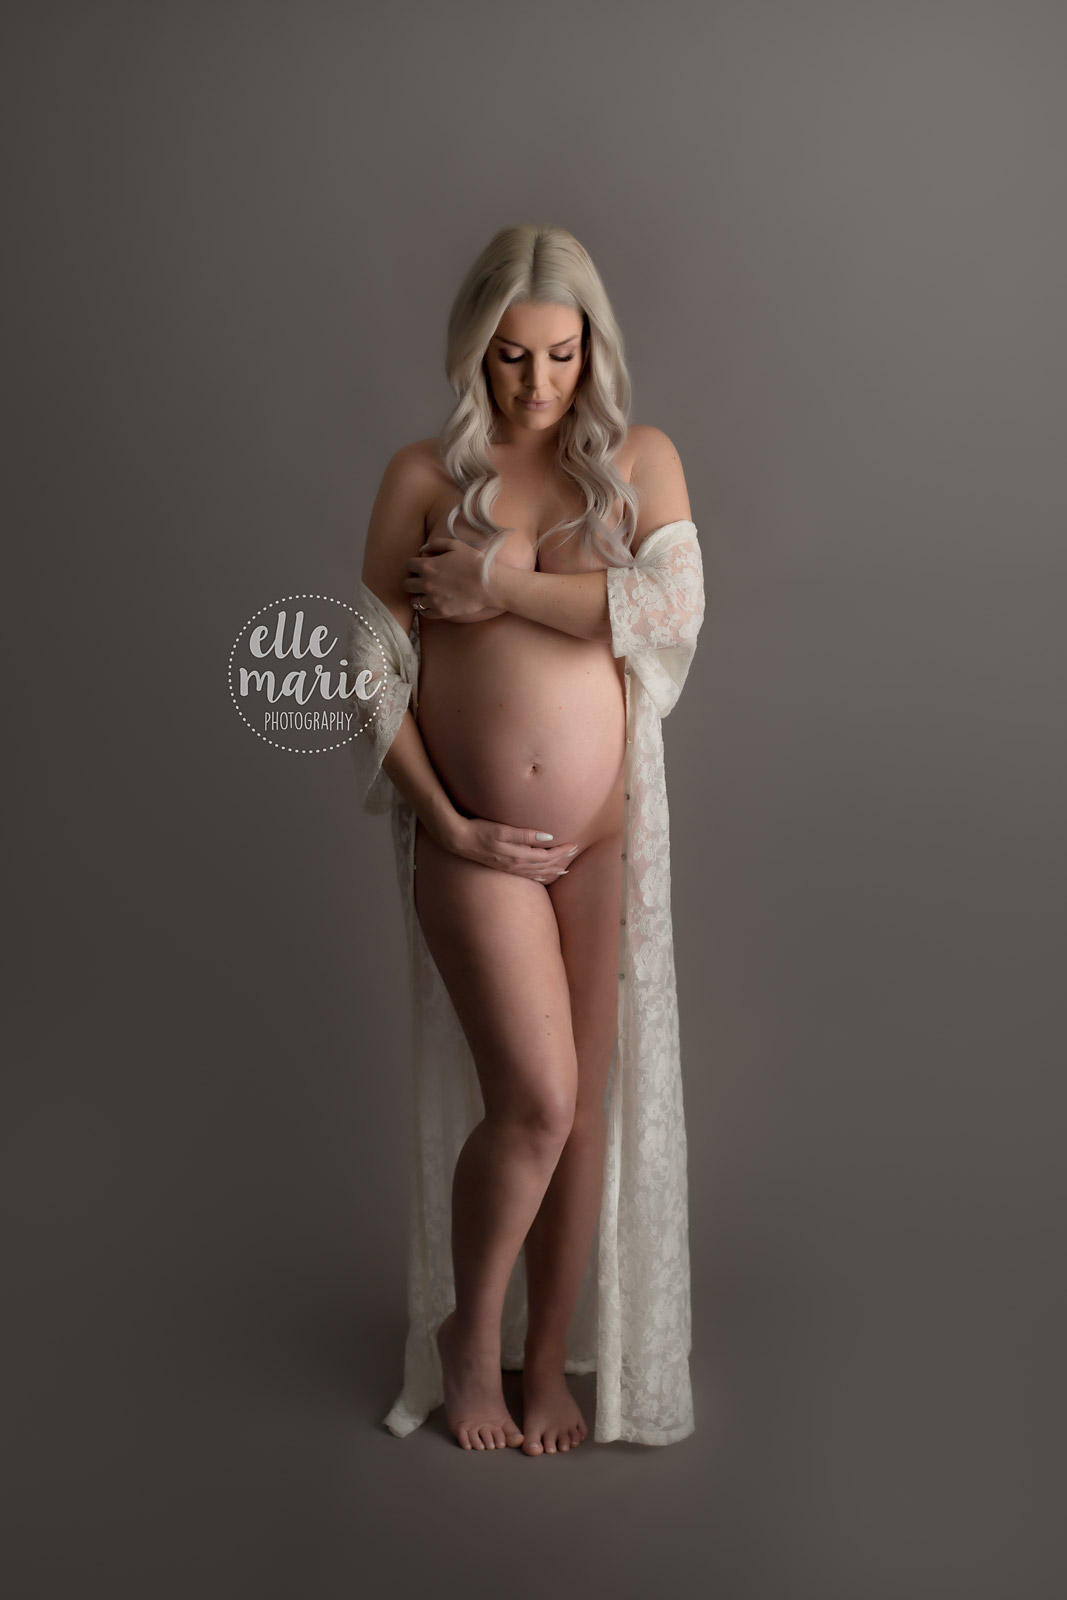 pregnant lady poses nude while hugging her belly